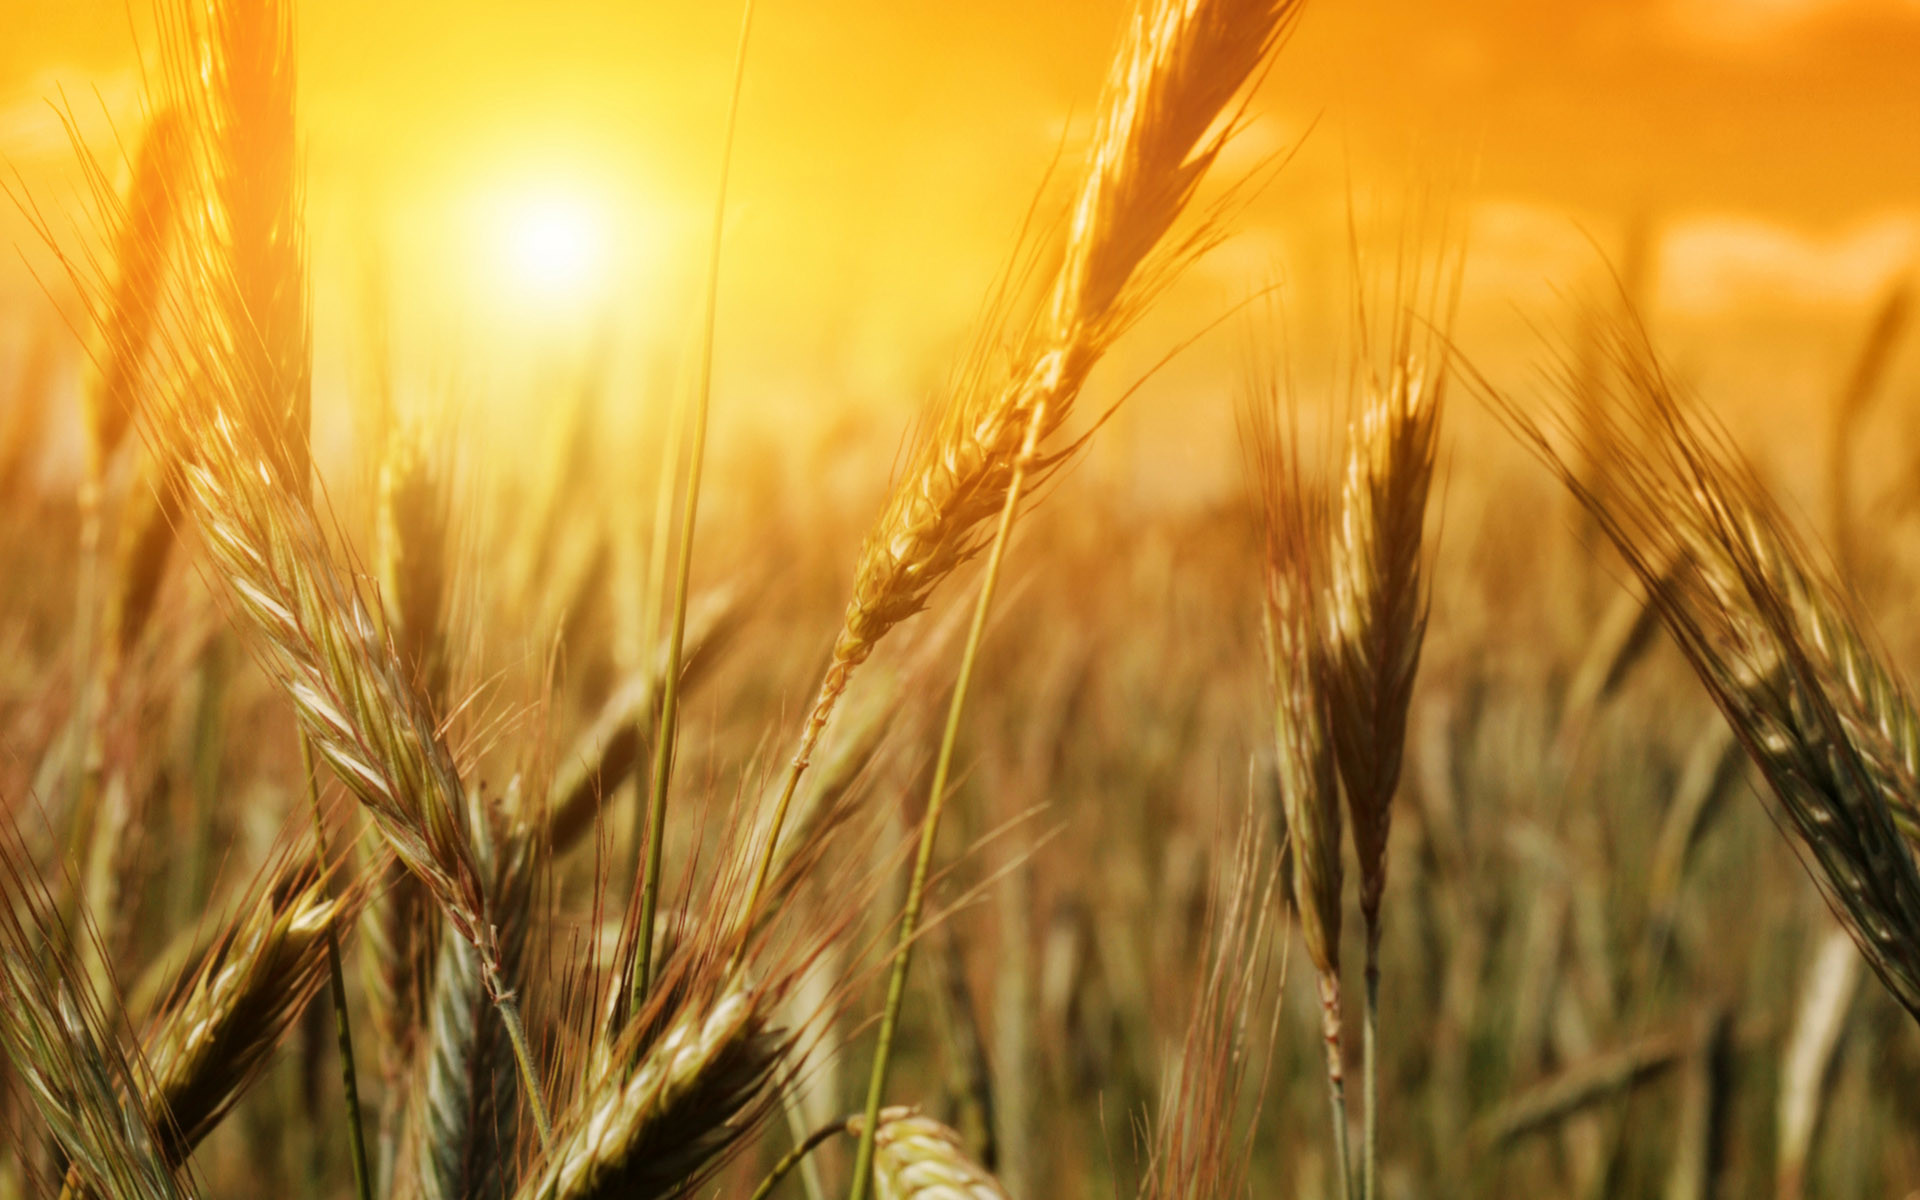 Wheat survey Canada helps to feed better. Photo: Shutterstock